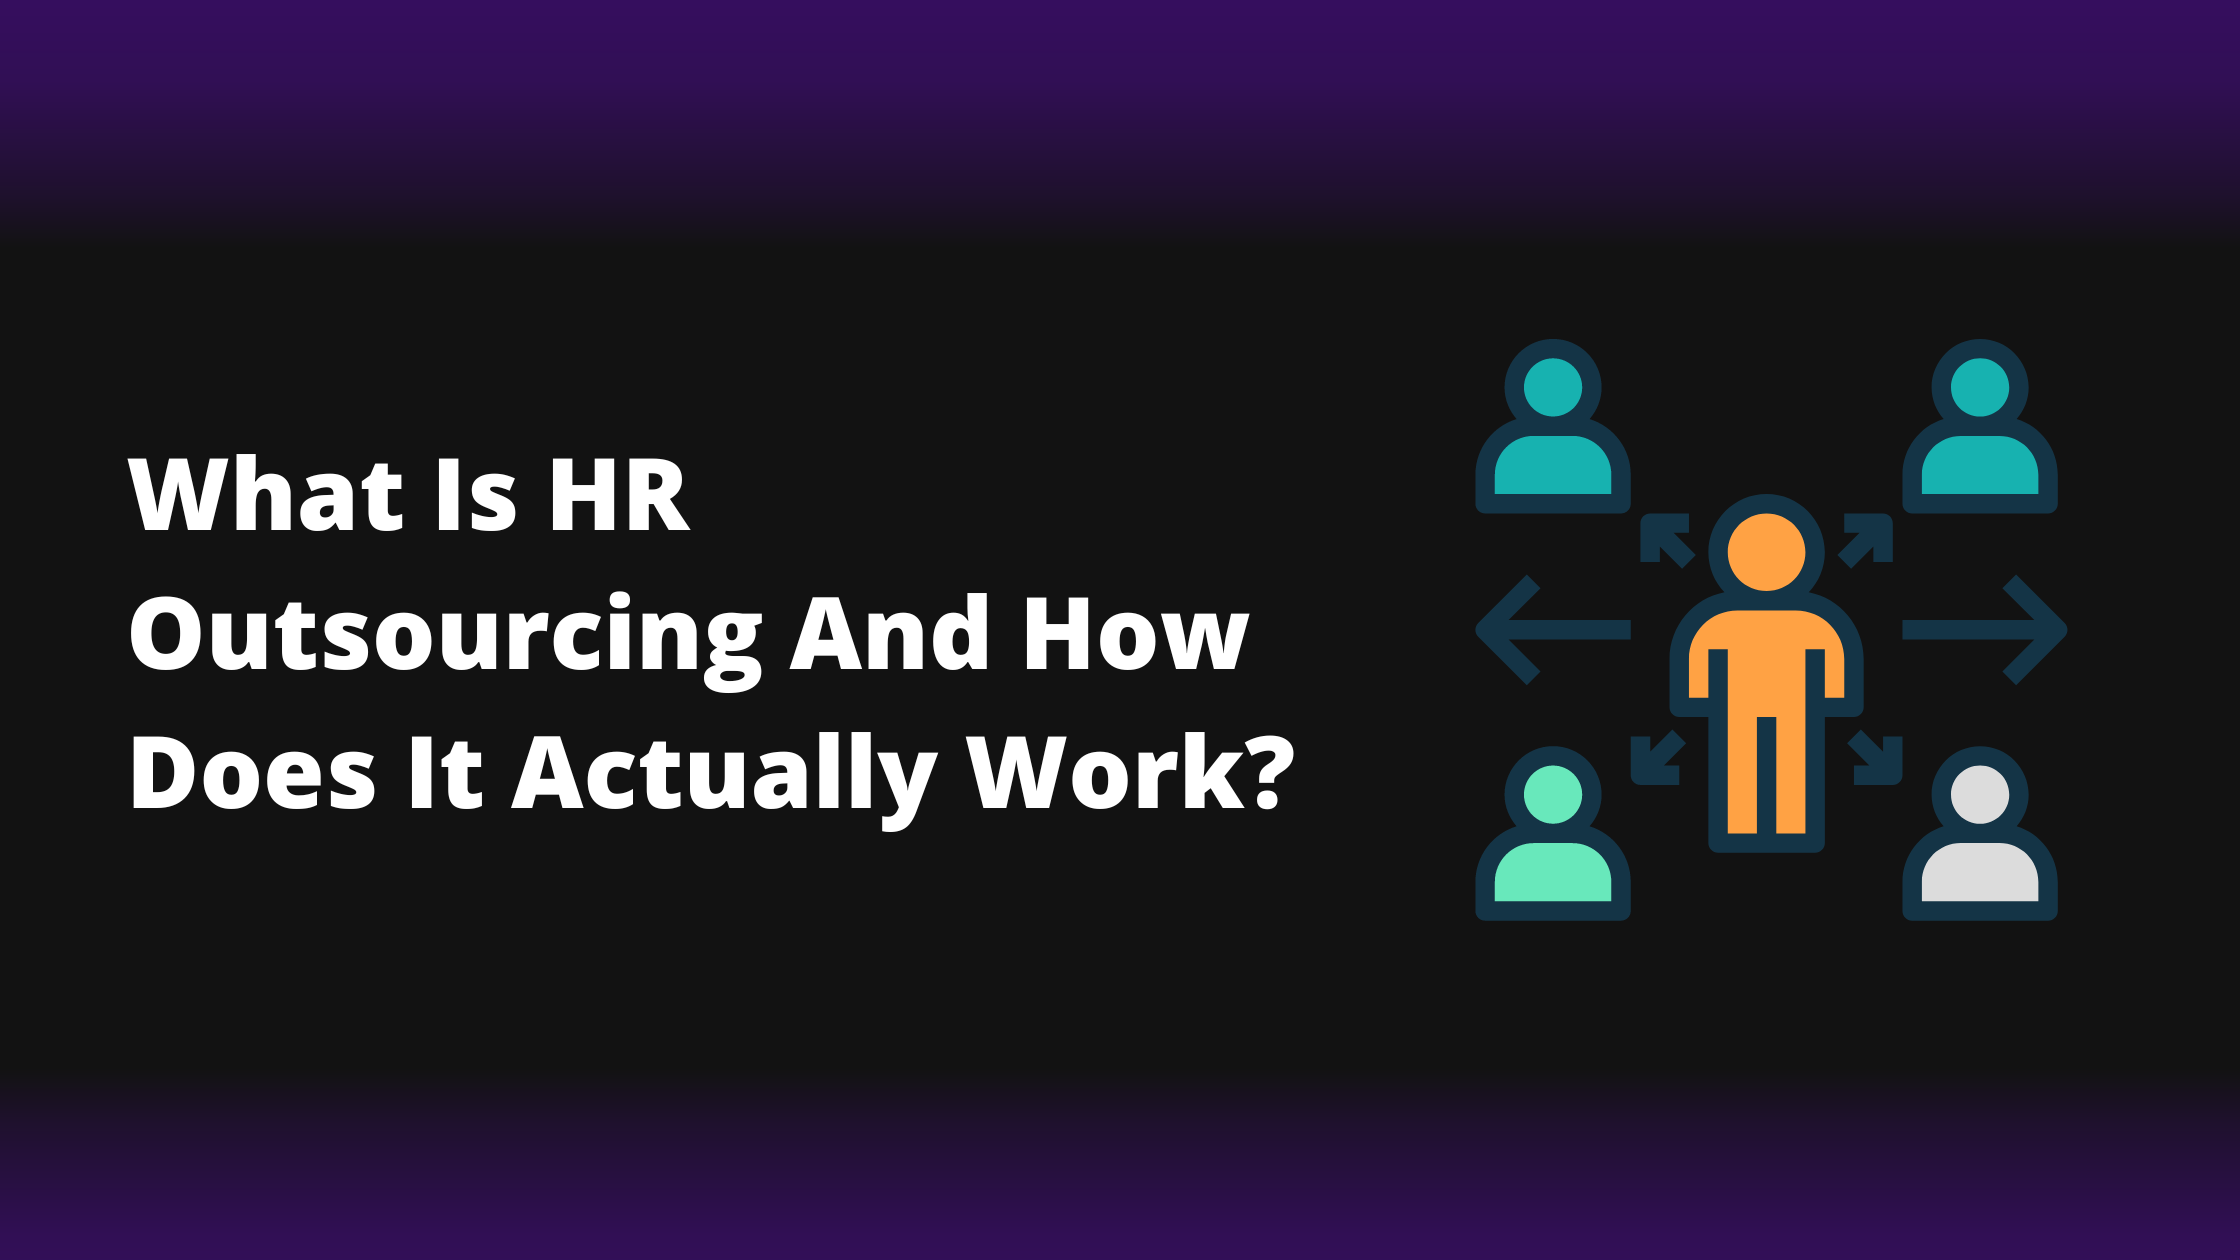 What Is HR Outsourcing And How Does It Actually Work?